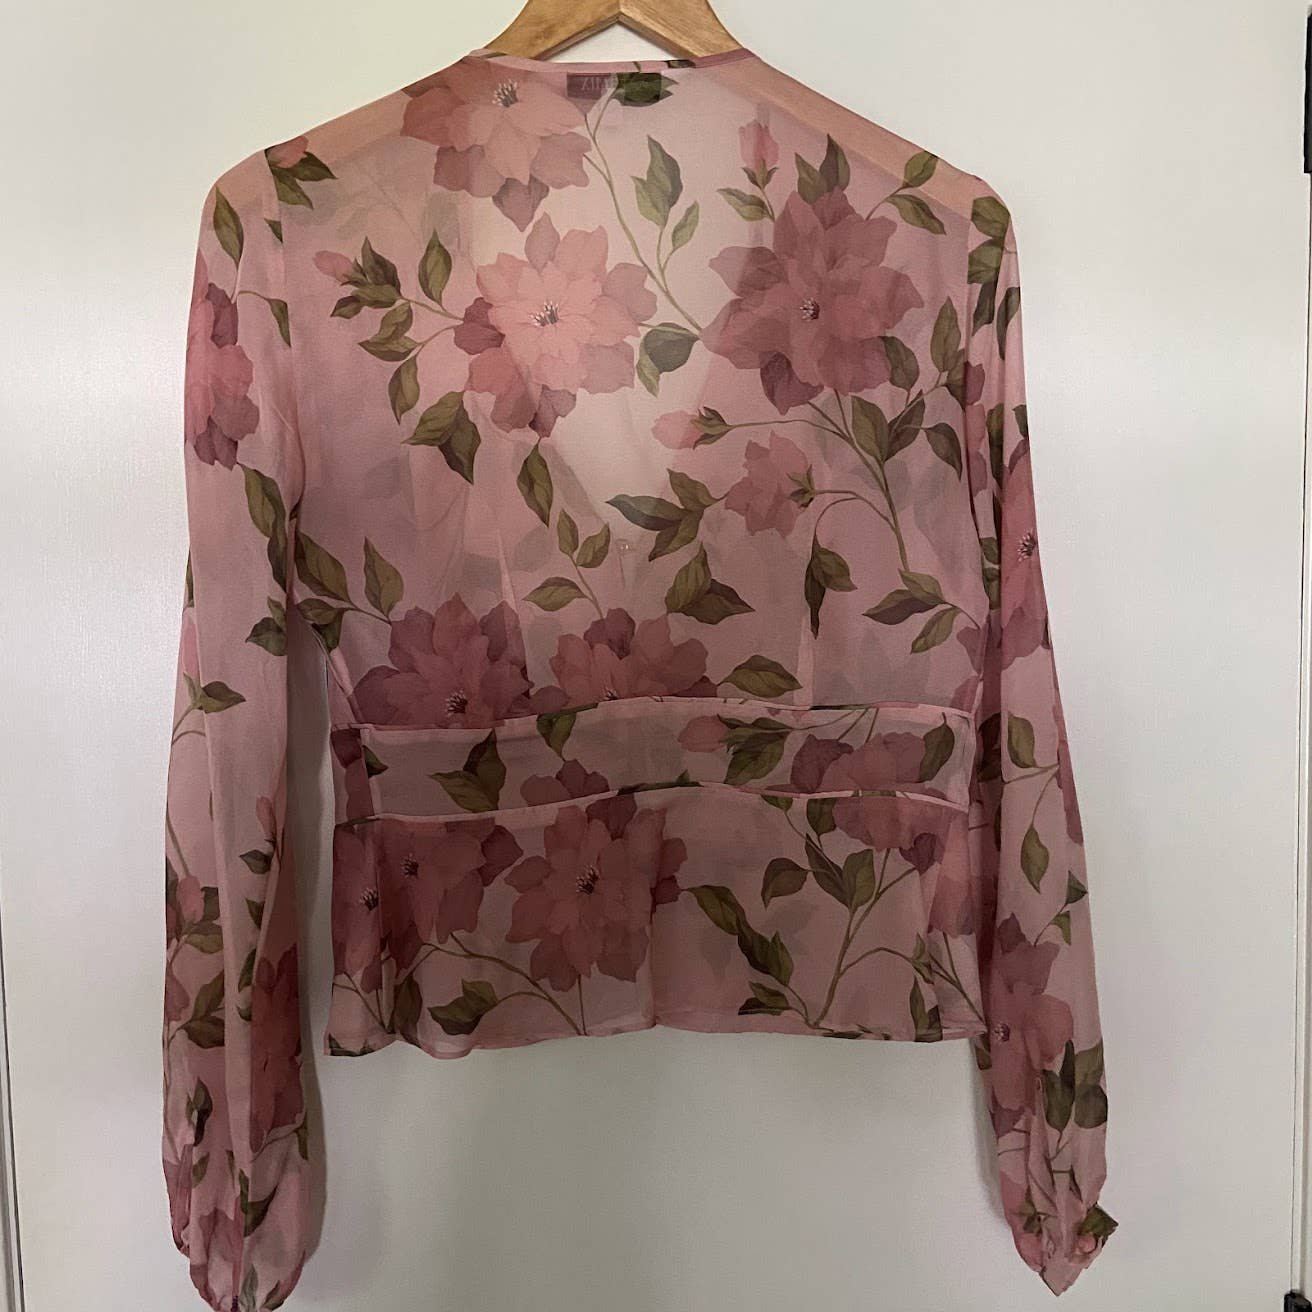 save up to 70% Intermix Floral Printed 100% Silk Long Sleeve Blouse Size 4 Small LCVoJ7yka well sale